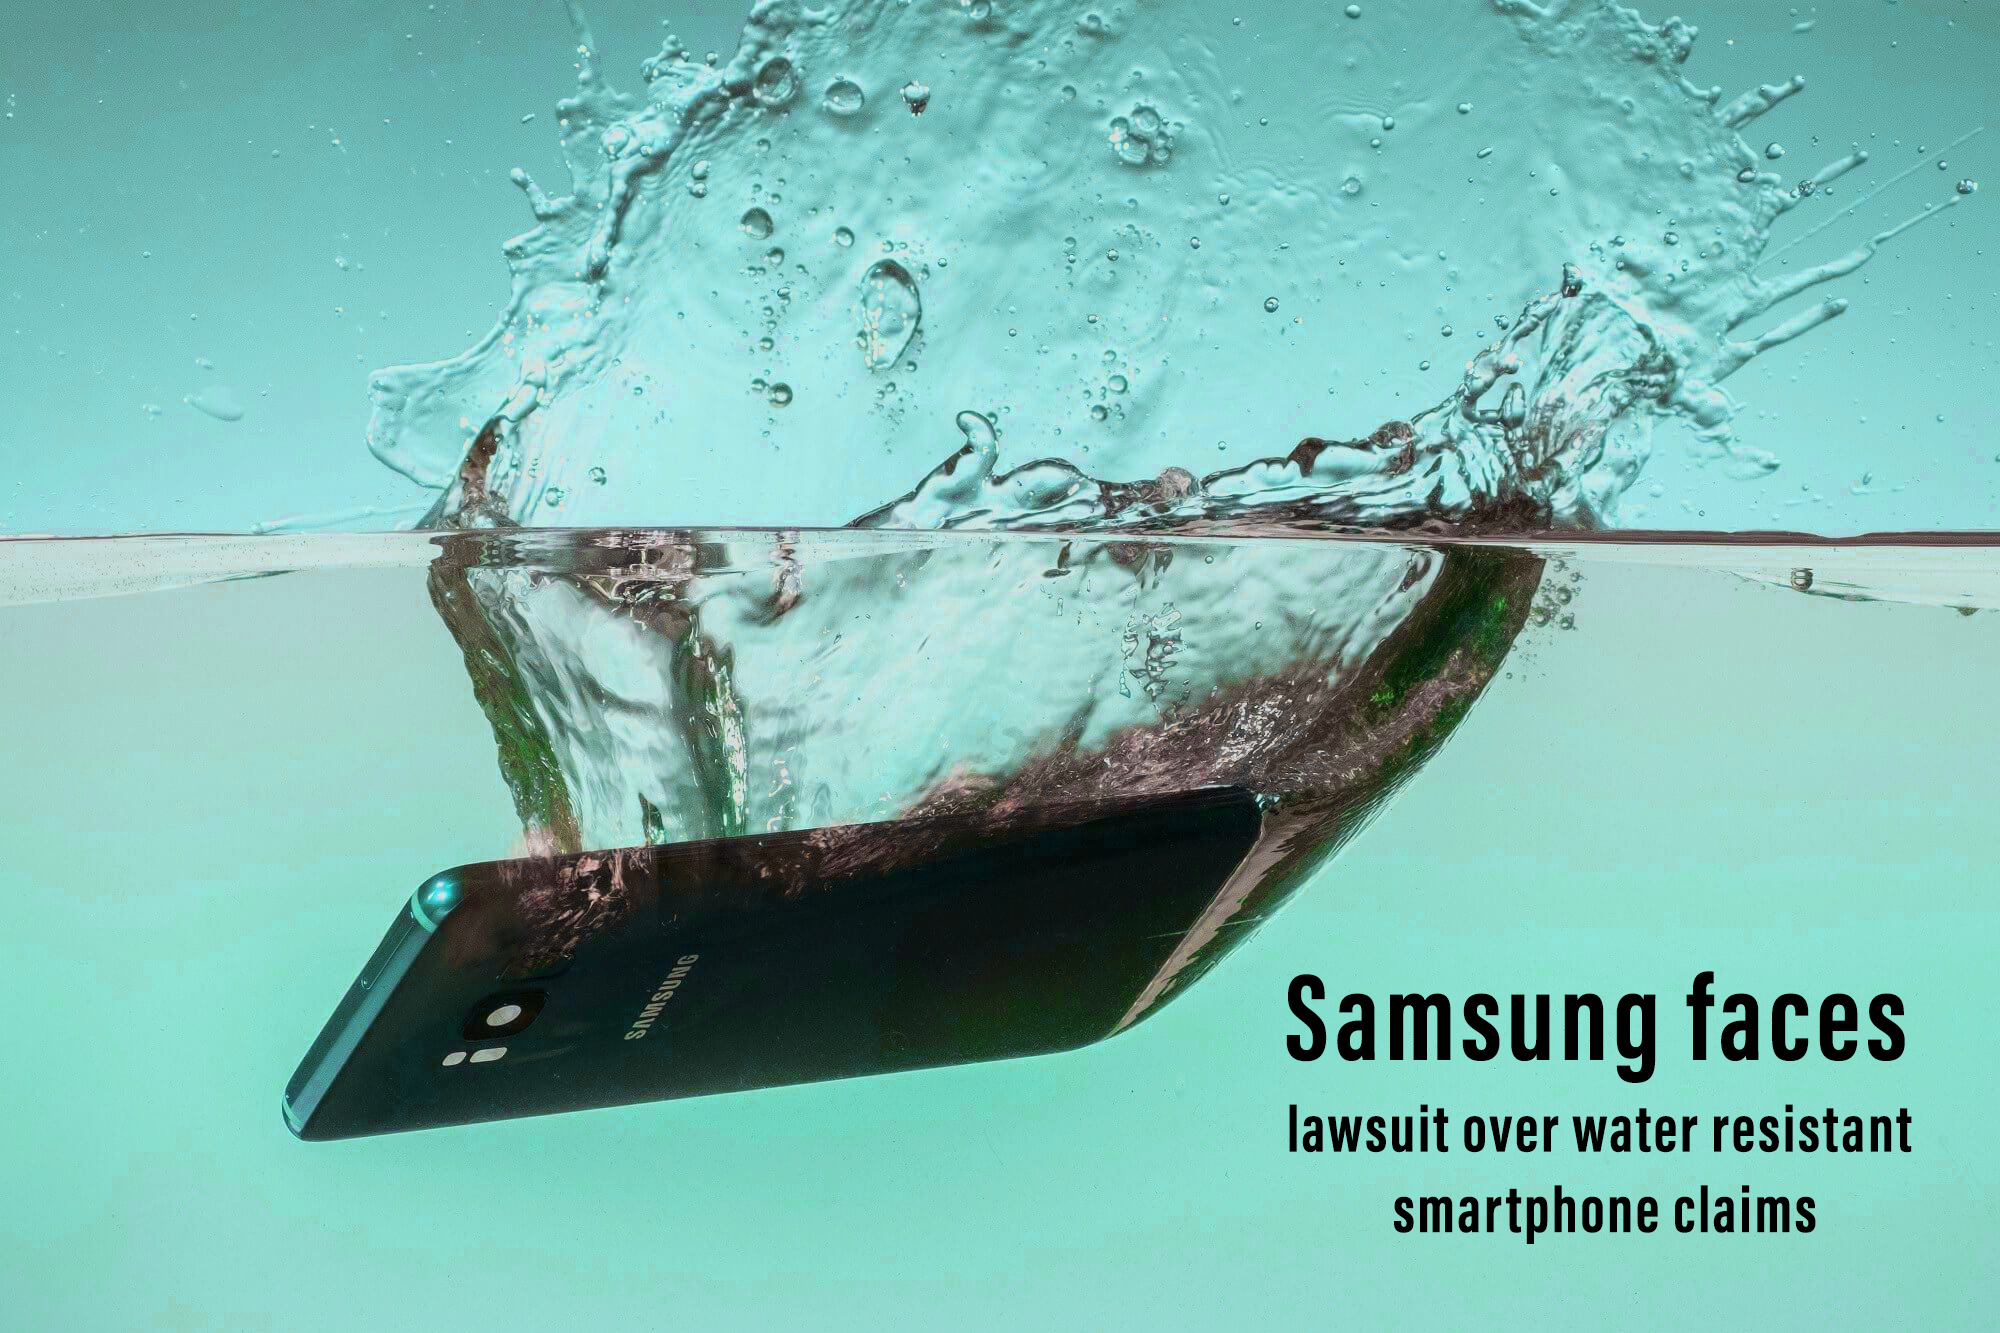 Samsung Facing Lawsuit against its claims of Water resistant devices